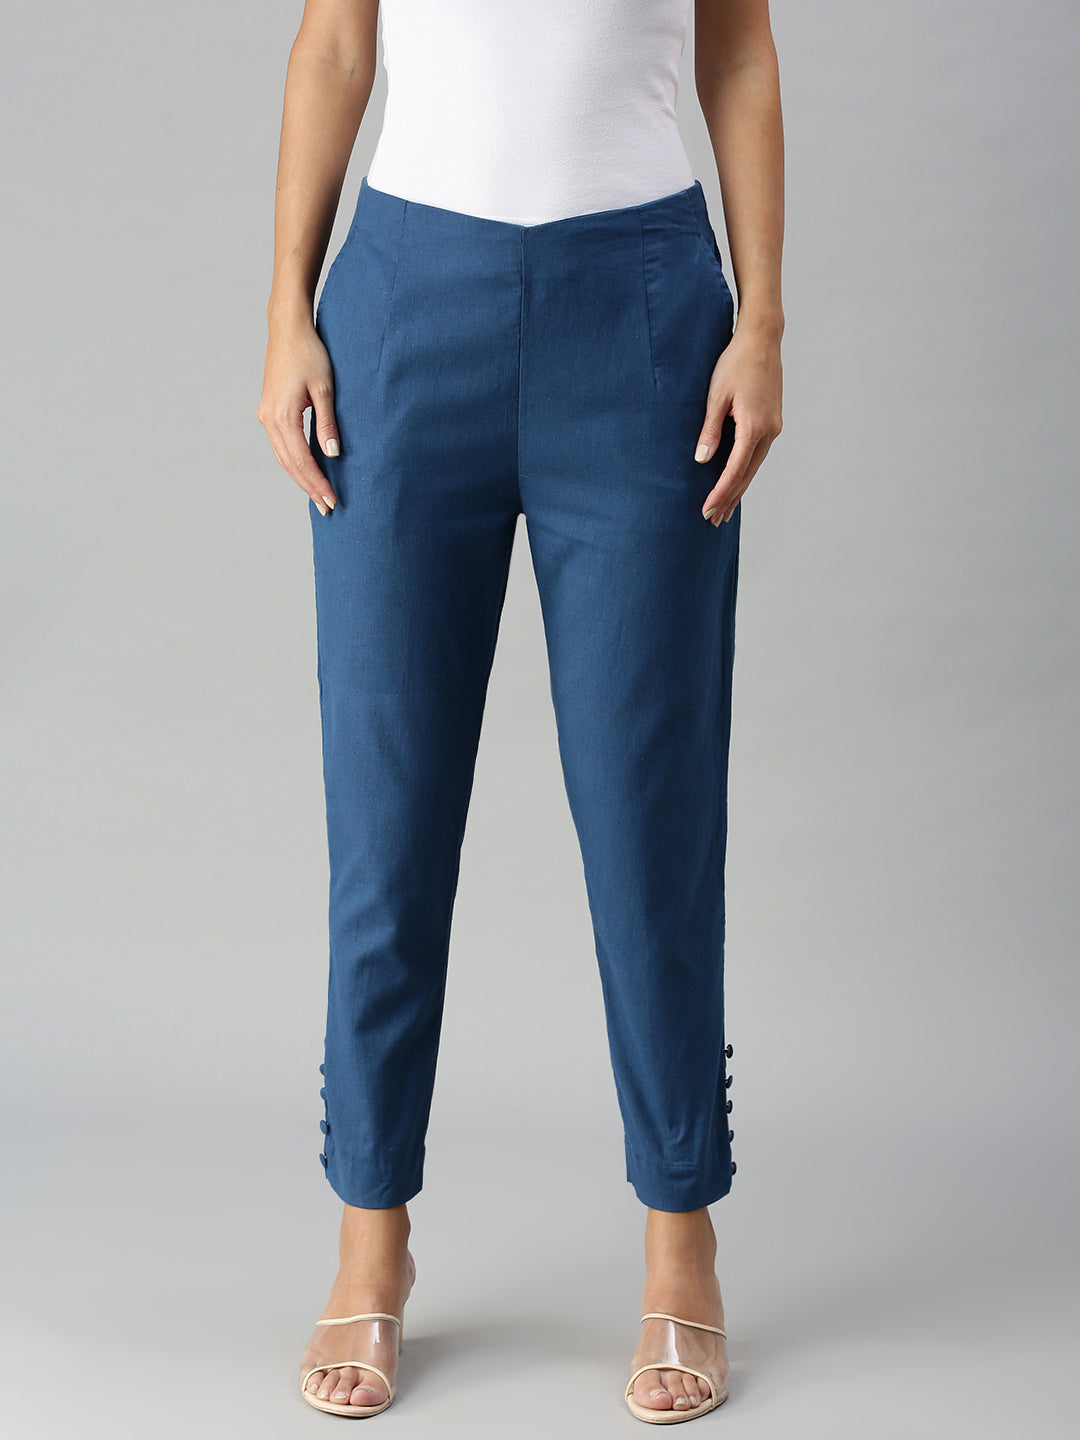 Buy Pencil Pants for Ladies Online from Blissclub